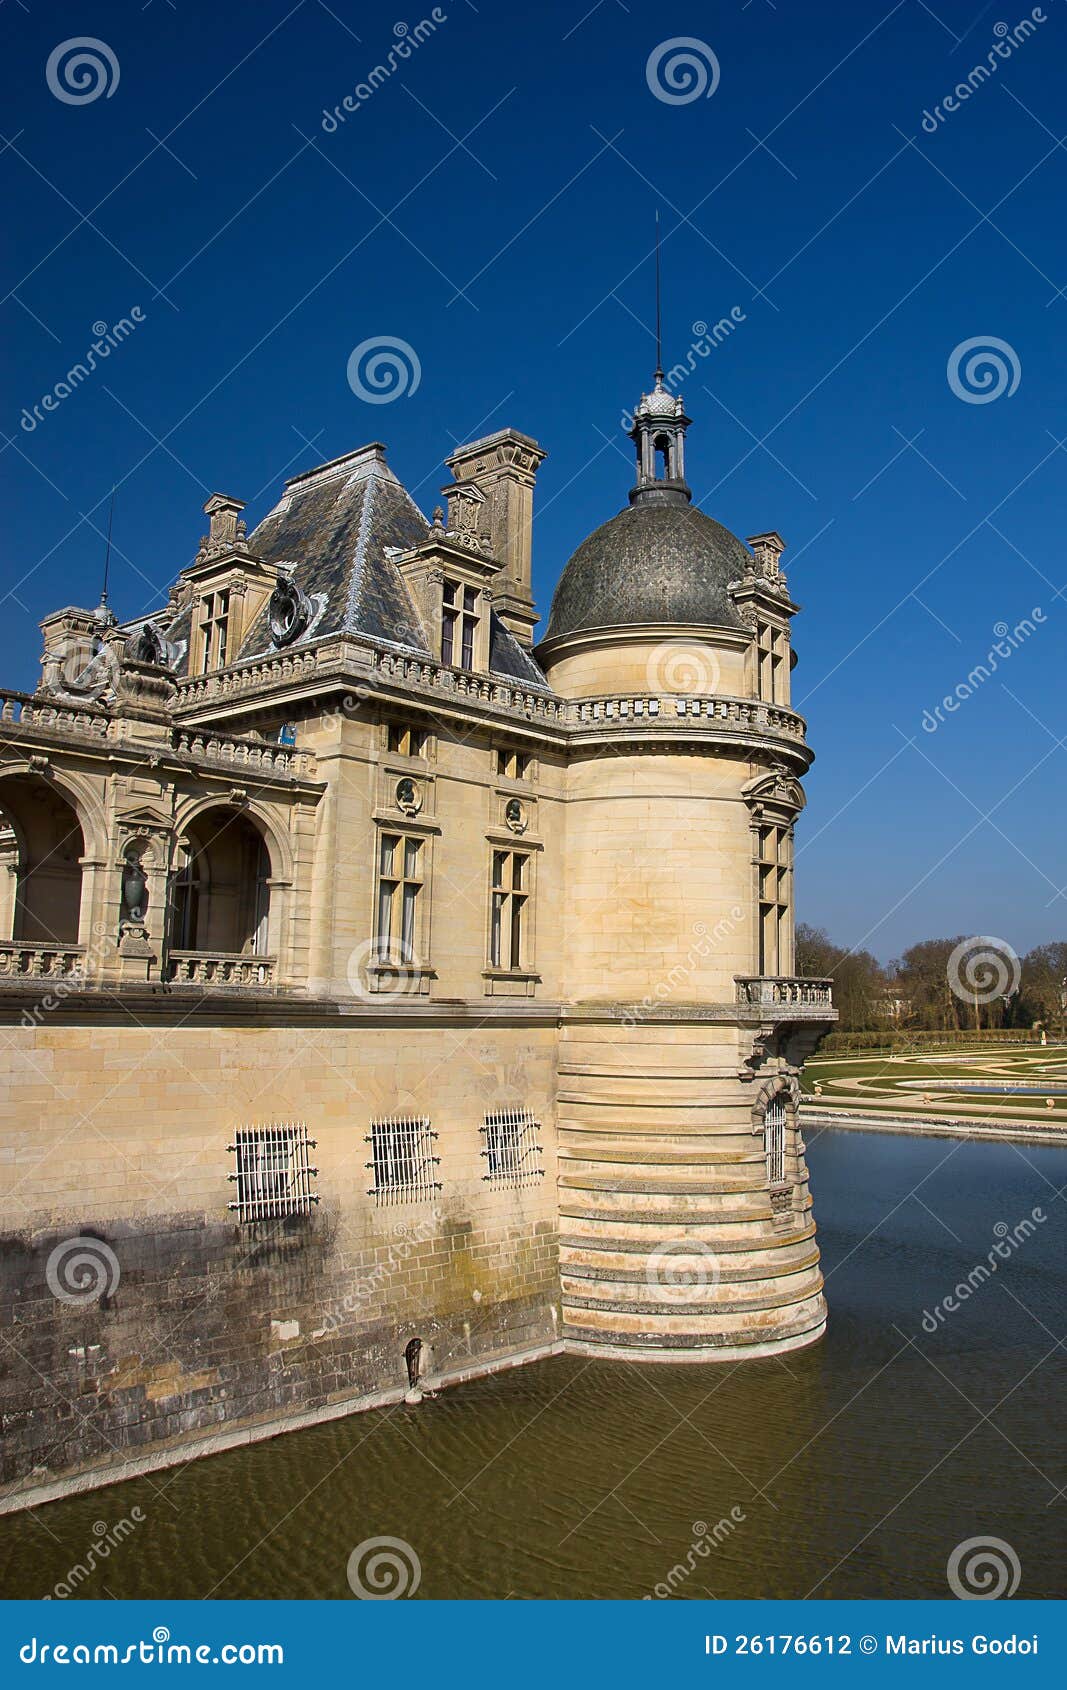 Section of the Chantilly Castle, France